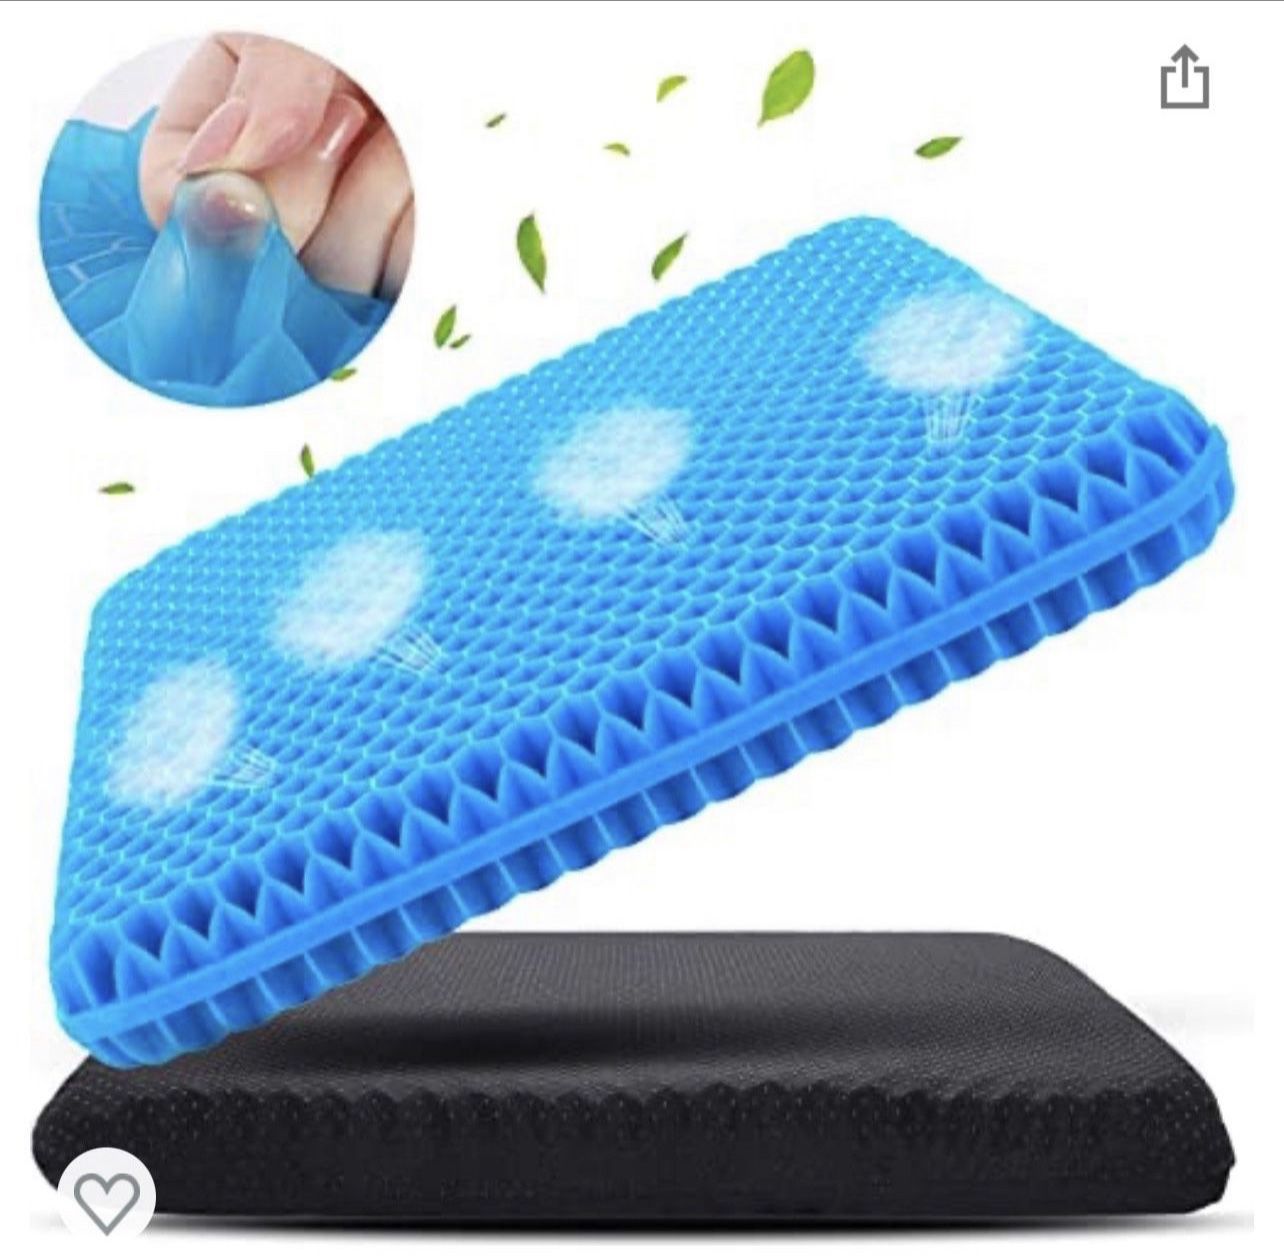 Large Gel Seat Cushion for Long Sitting (Super Large & Thick), Soft & Breathable, Gel Cushion for Wheelchair Reduce Sweat, Gel Chair Cushion for Hip P